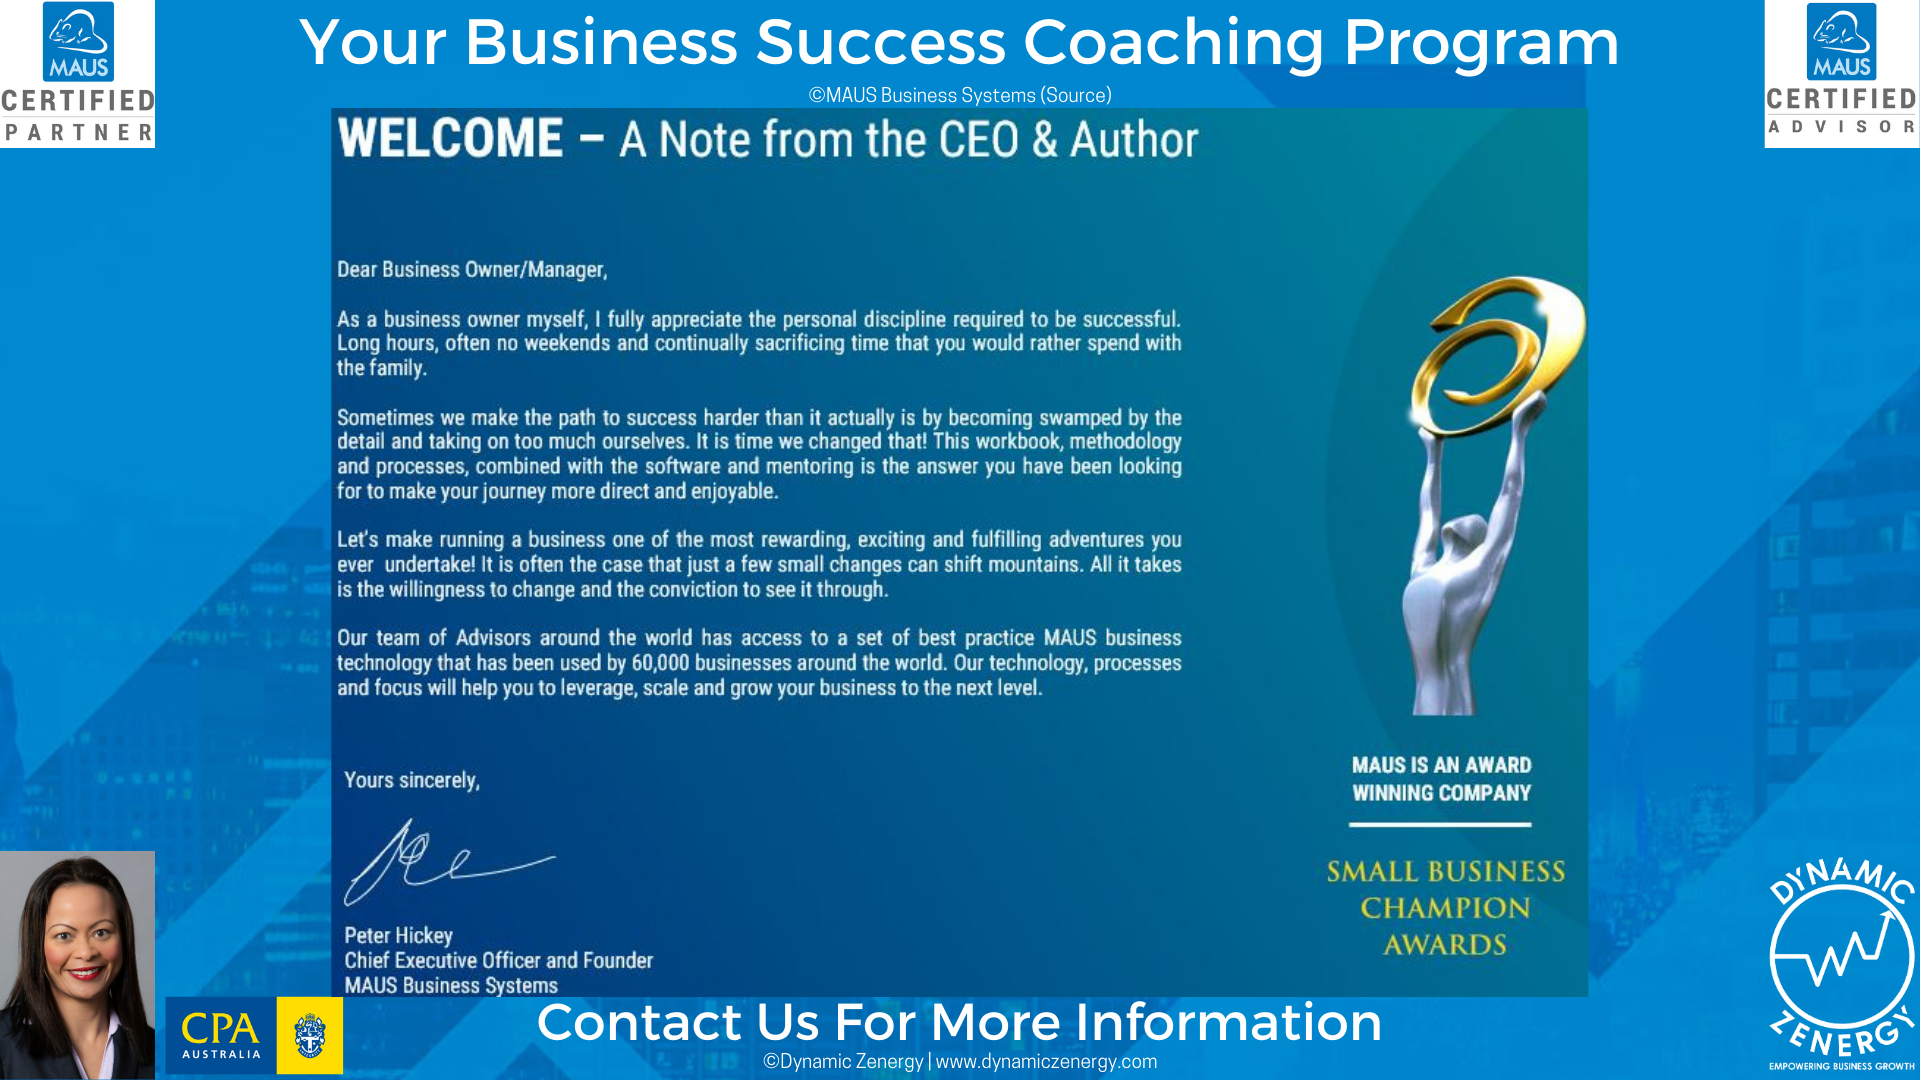 Peter Hickey Your Business Success